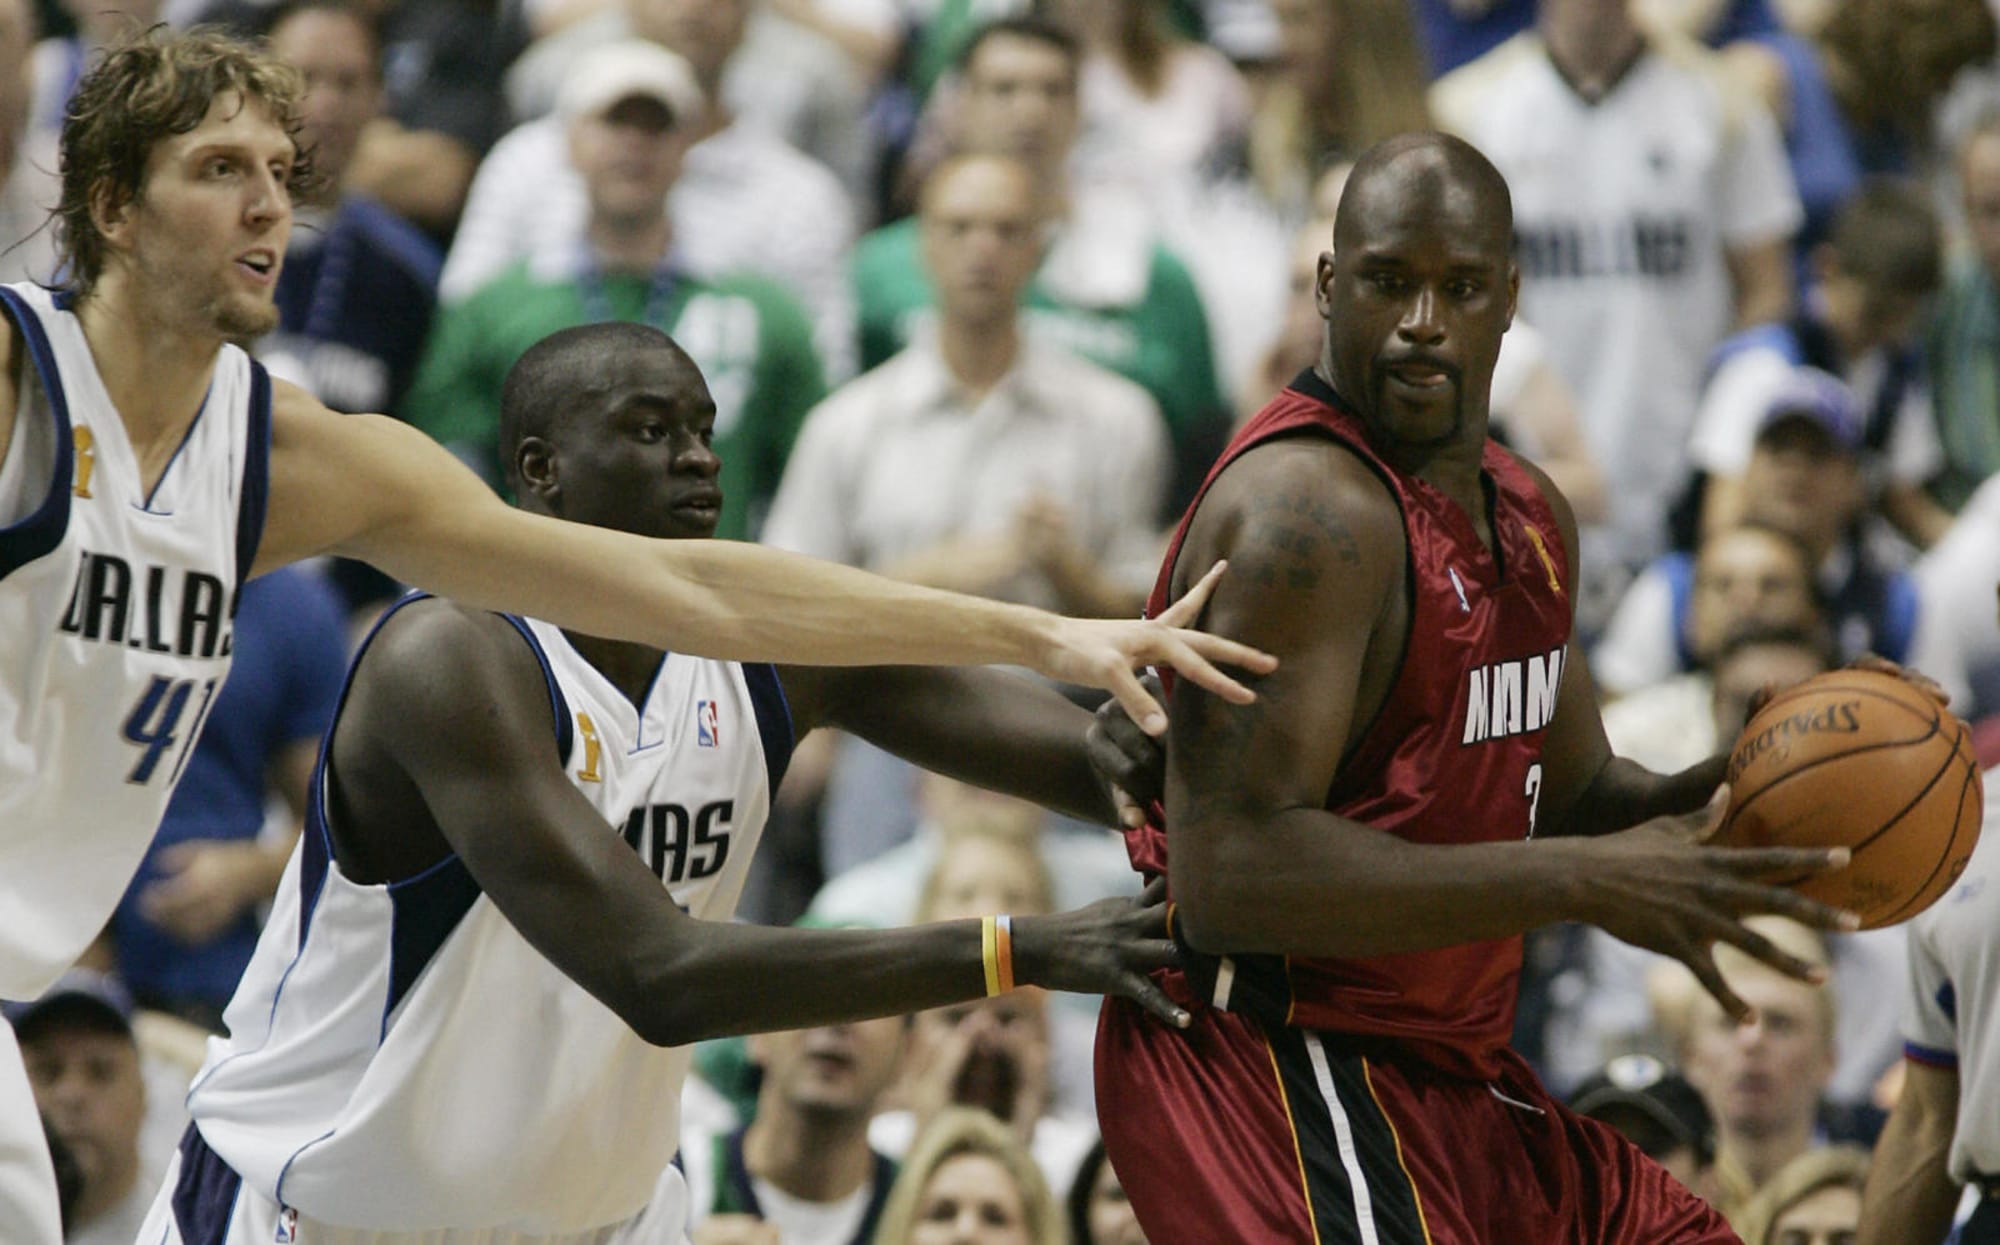 SHAQ on X: you kno i love @miamiheat but who's gaurding me. gimme your  thoughts  / X